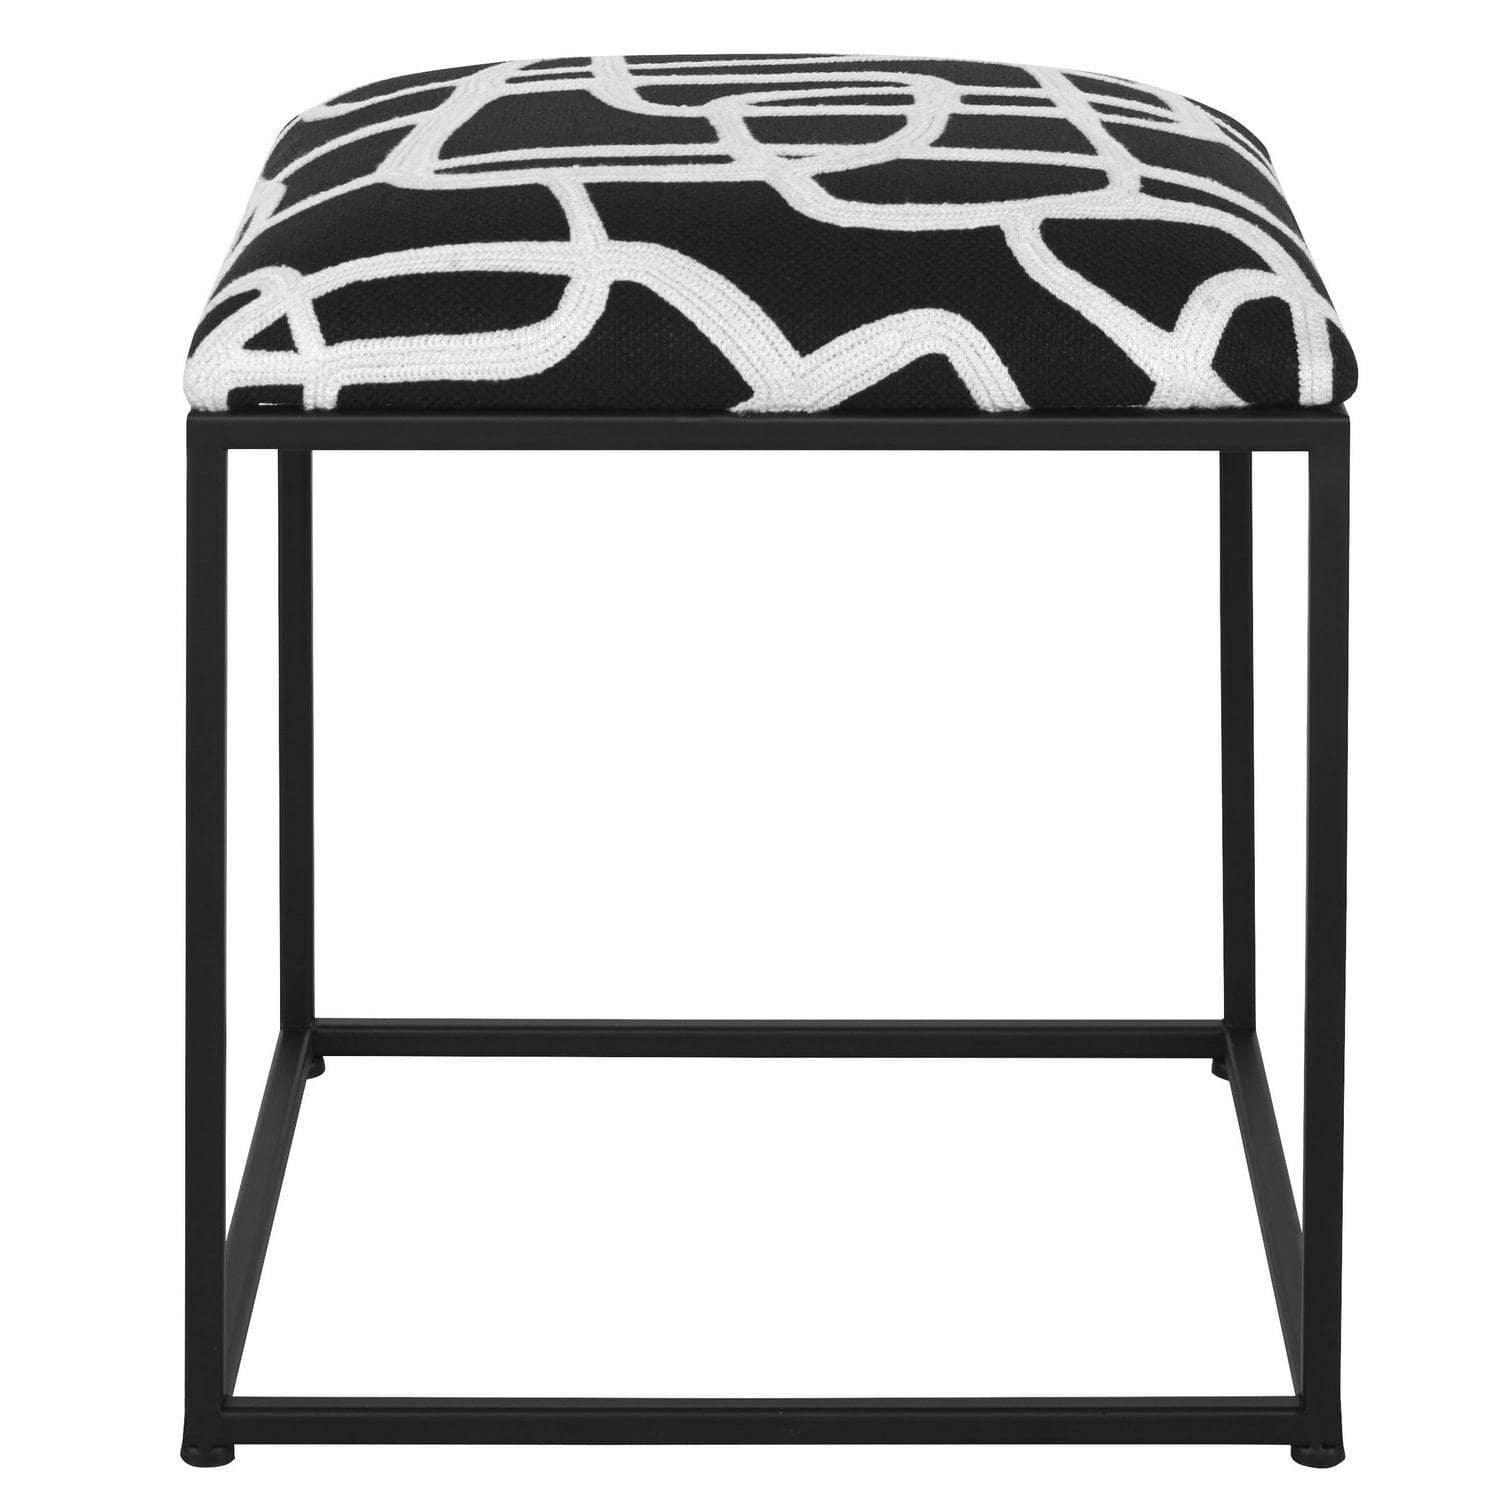 The Uttermost - Twists And Turns Accent Stool - 23690 | Montreal Lighting & Hardware